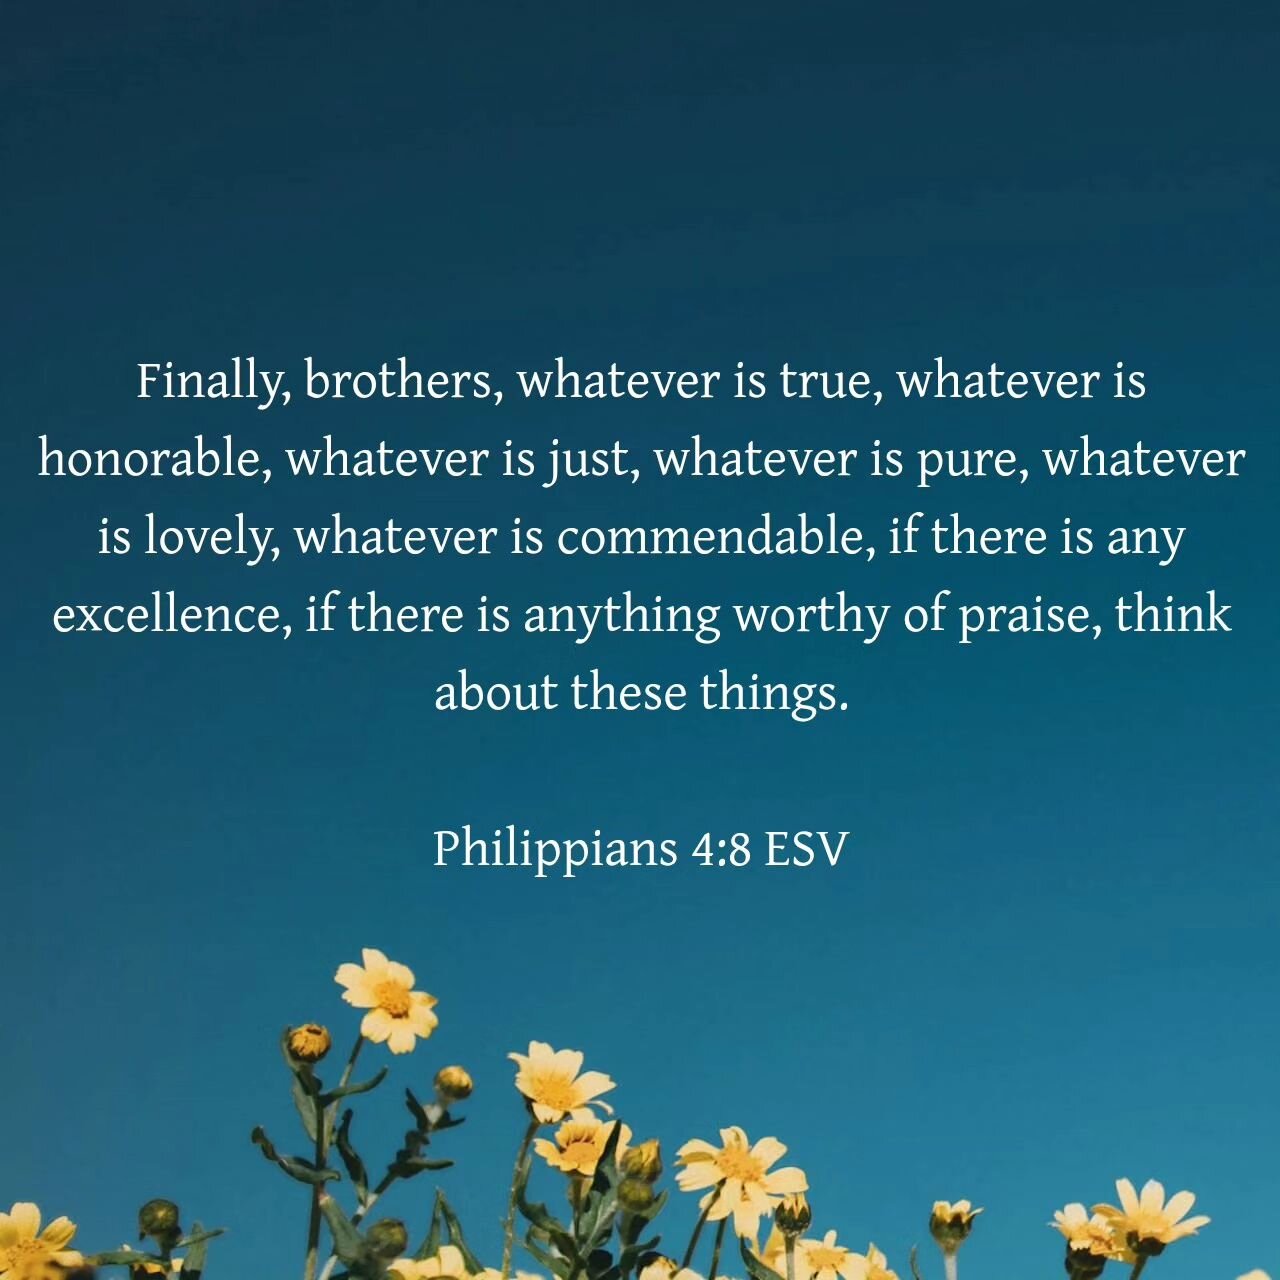 ‭‭Philippians 4:8 ESV‬‬

Finally, brothers, whatever is true, whatever is honorable, whatever is just, whatever is pure, whatever is lovely, whatever is commendable, if there is any excellence, if there is anything worthy of praise, think about thes